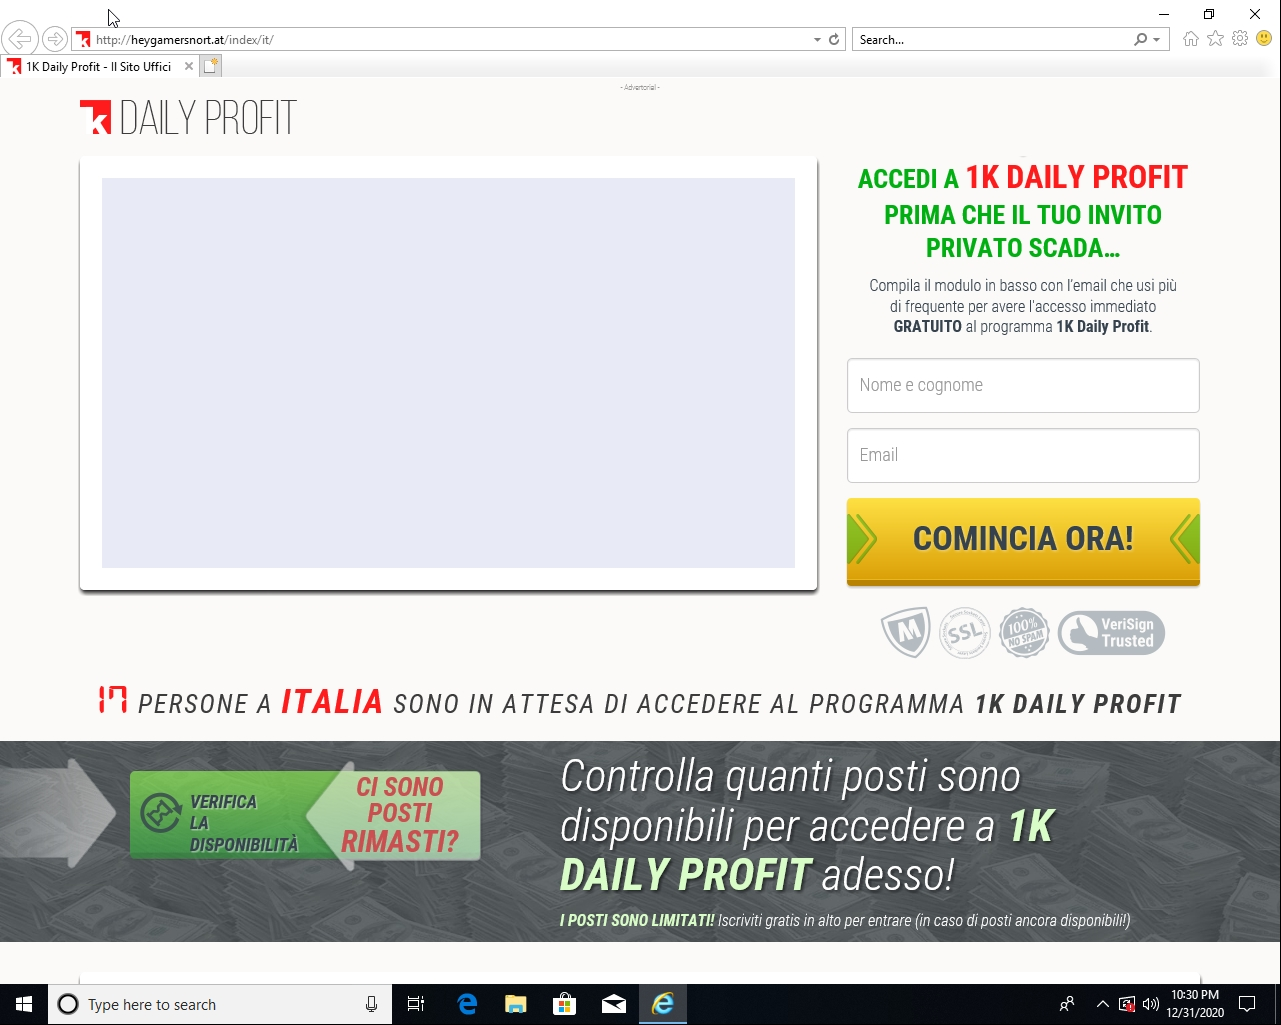 This is an example of a relatively high-quality website set up by the domain heygamersnort[.]at, this one in Italian.